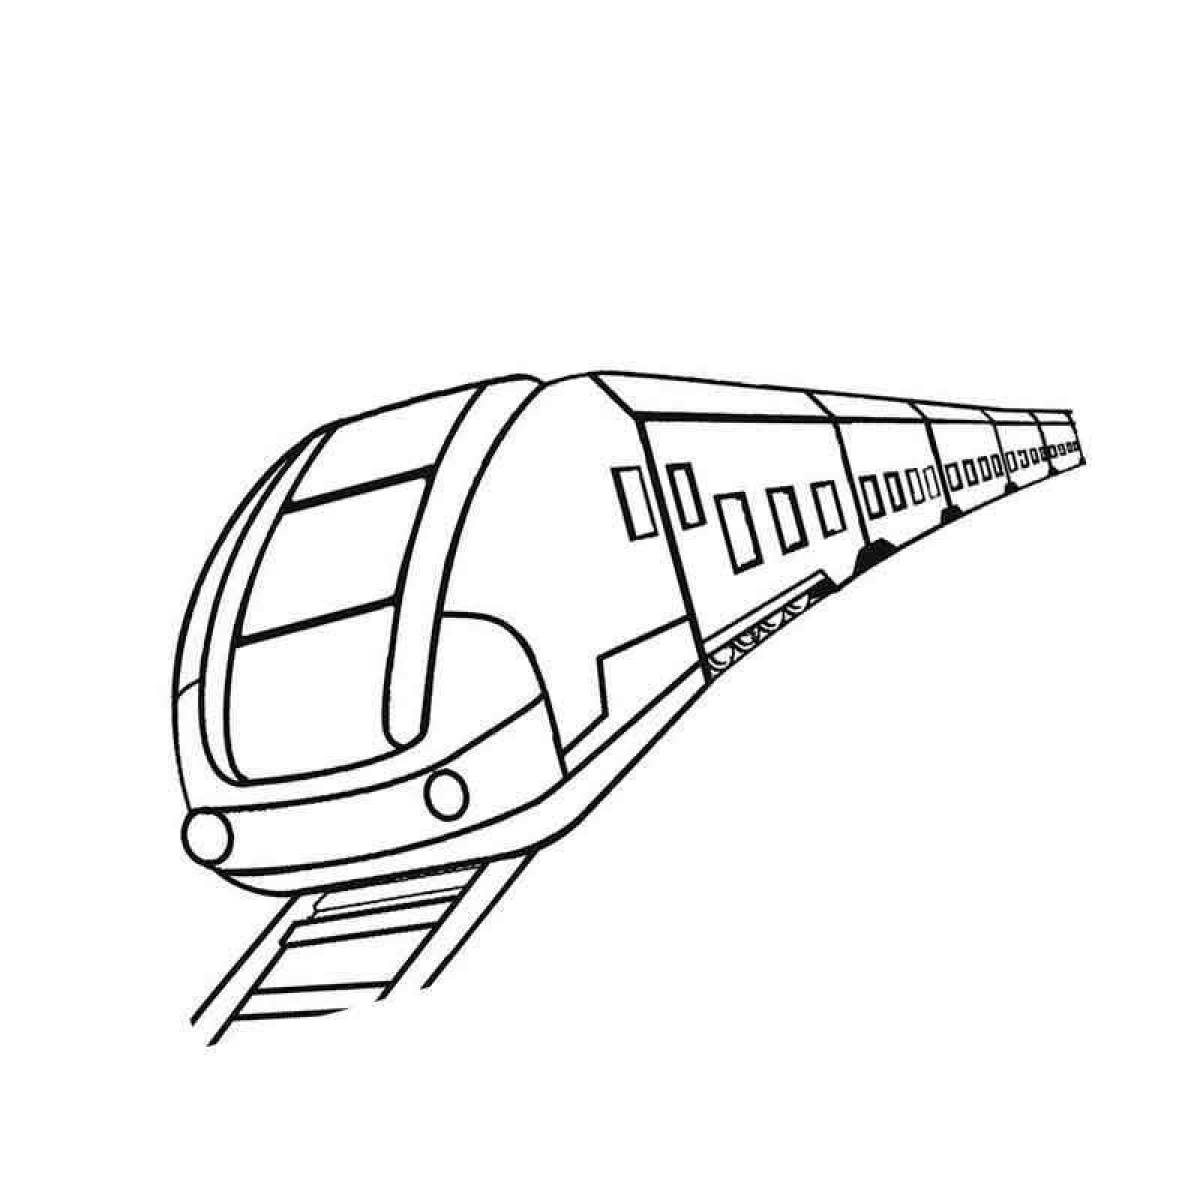 A fun subway coloring book for kids